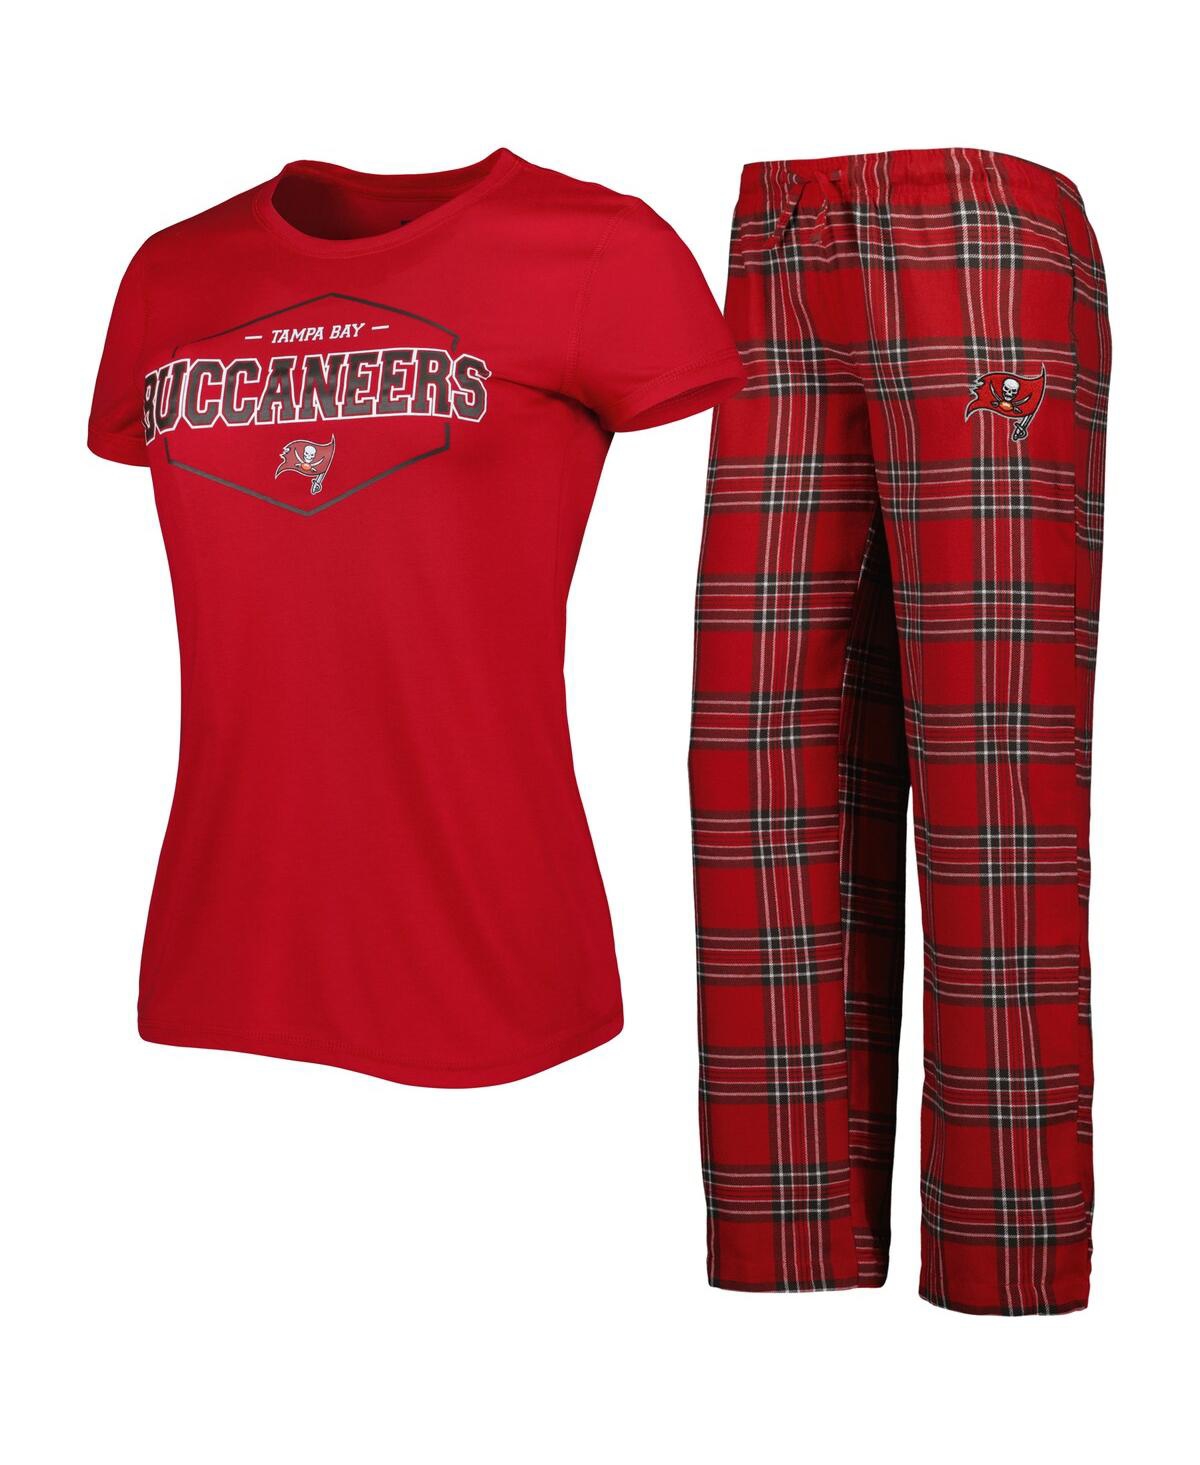 Women's Concepts Sport Red, Pewter Tampa Bay Buccaneers Badge T-shirt and Pants Sleep Set - Red, Pewter